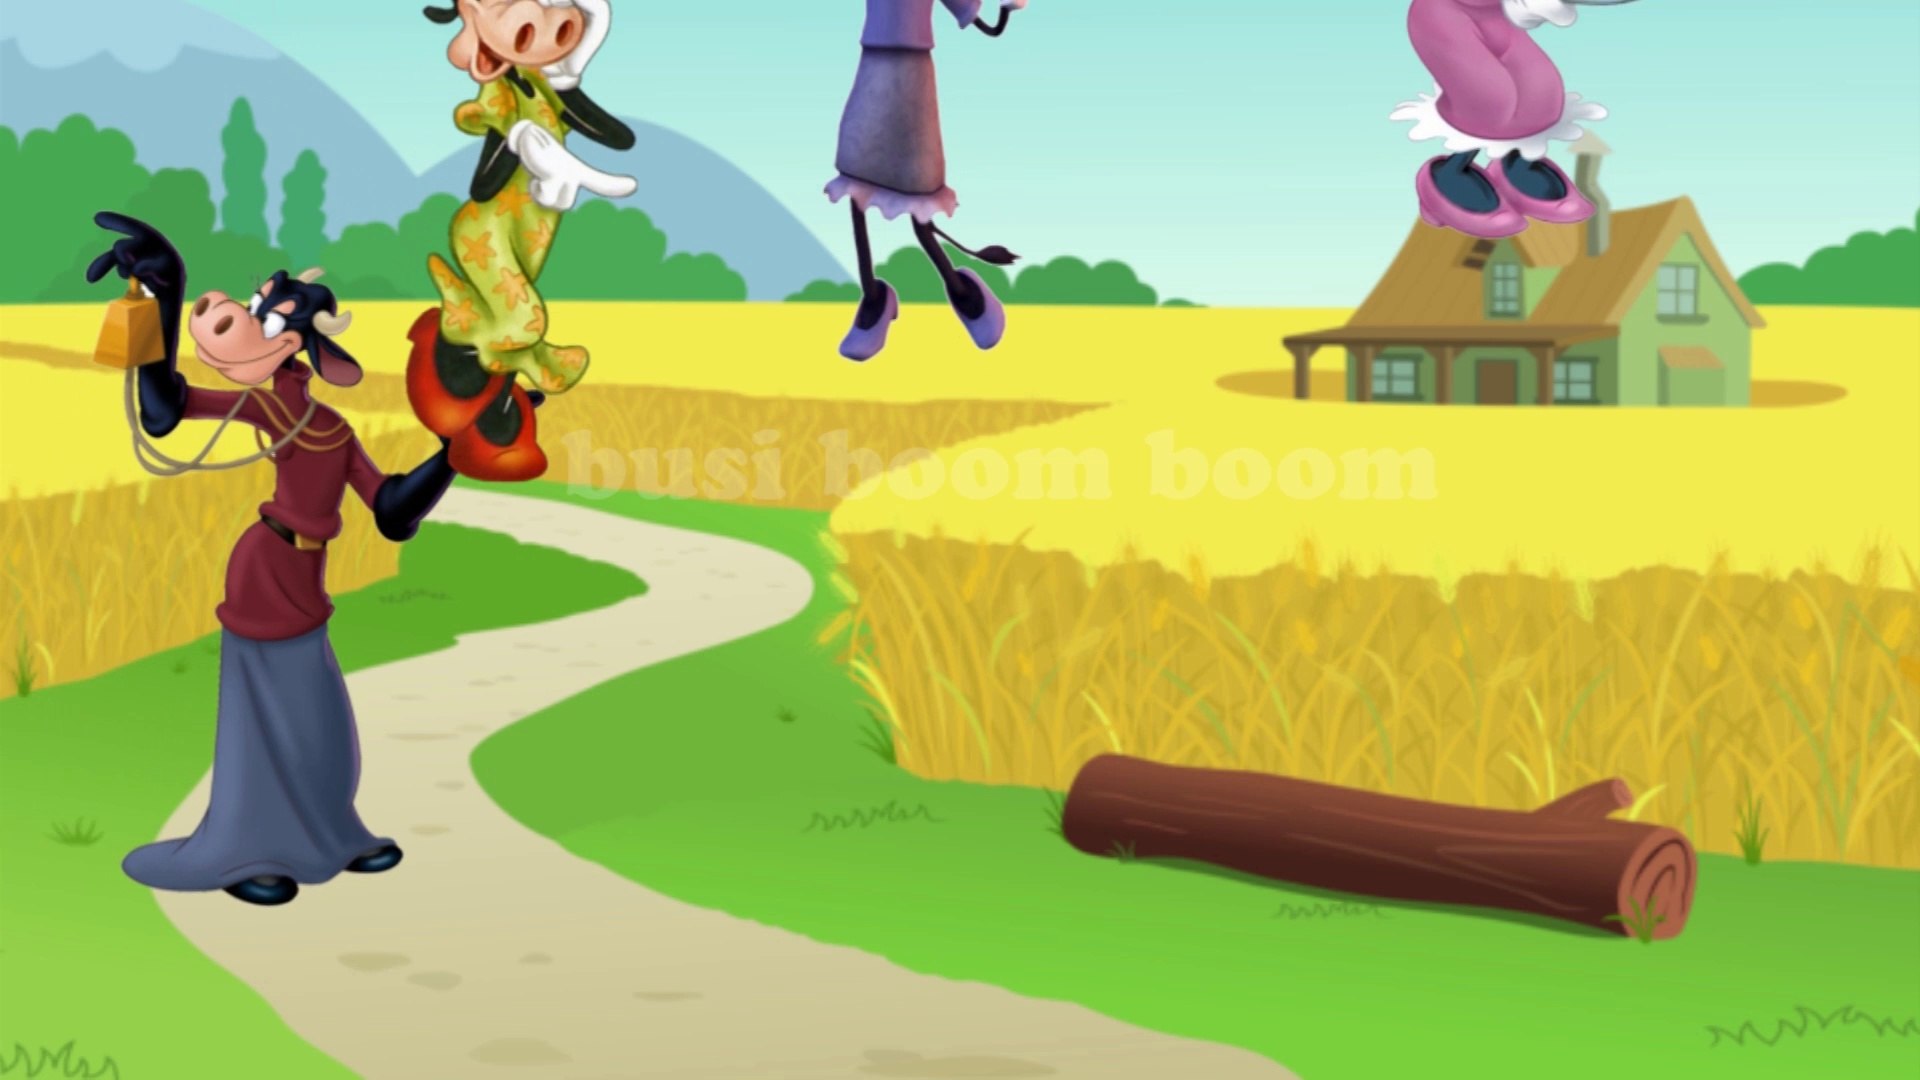 Clarabelle Cow Mickey Mouse Clubhouse